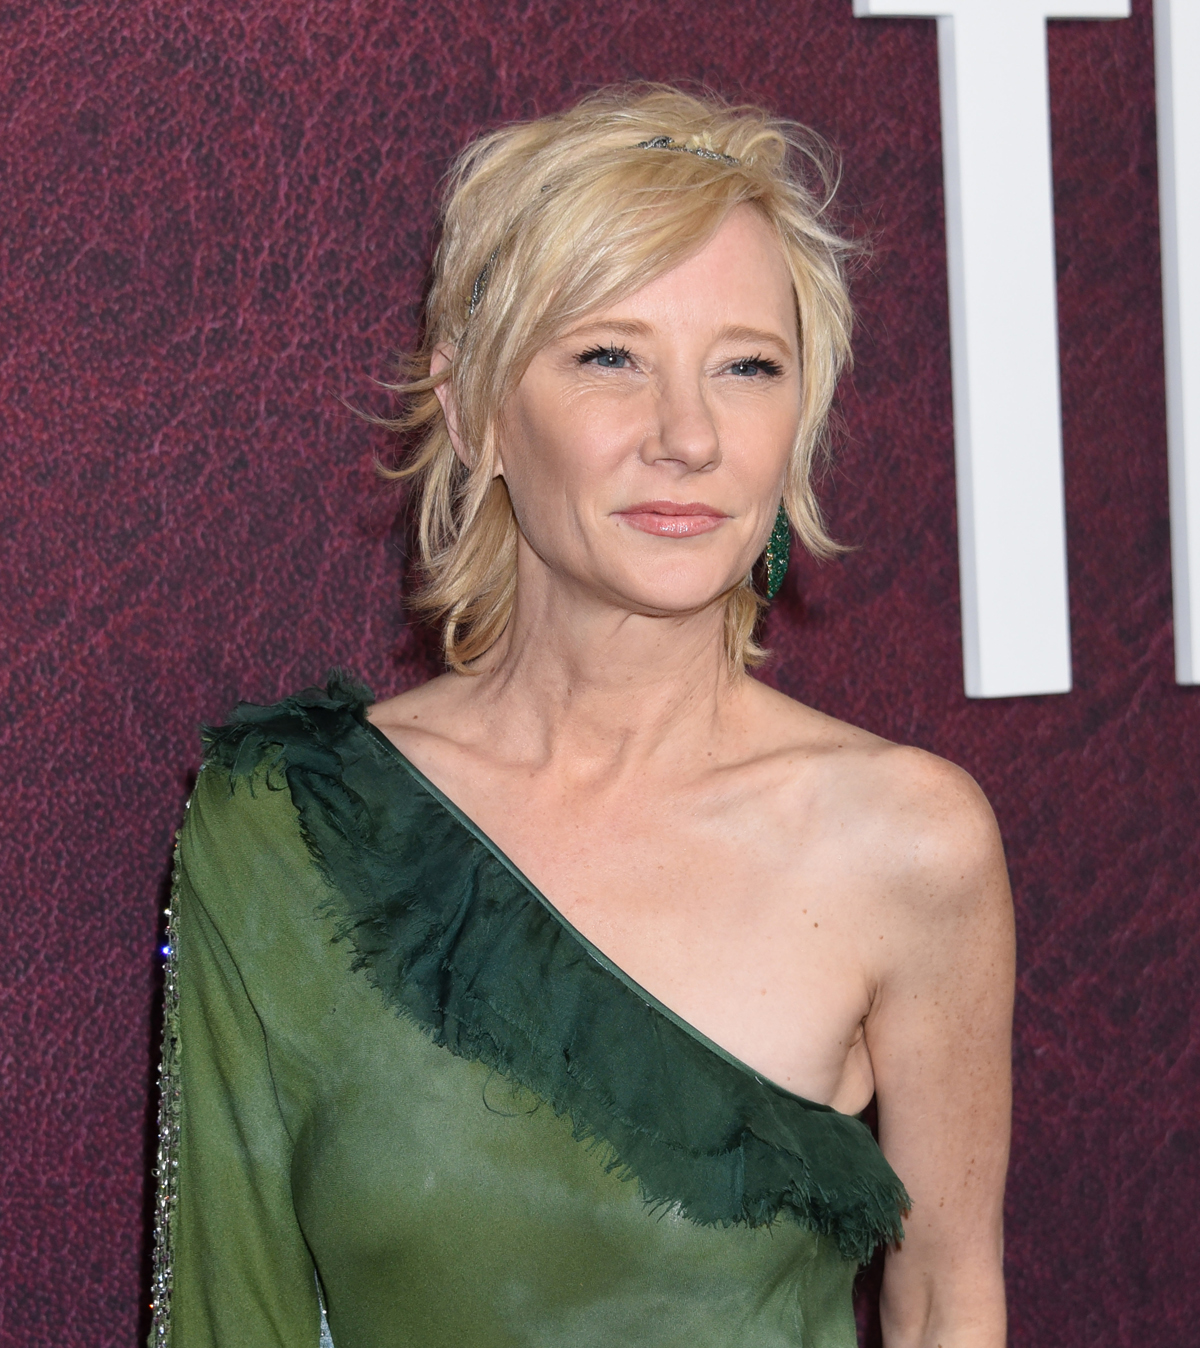 #Anne Heche Not Expected To Survive, Will Be Taken Off Life Support